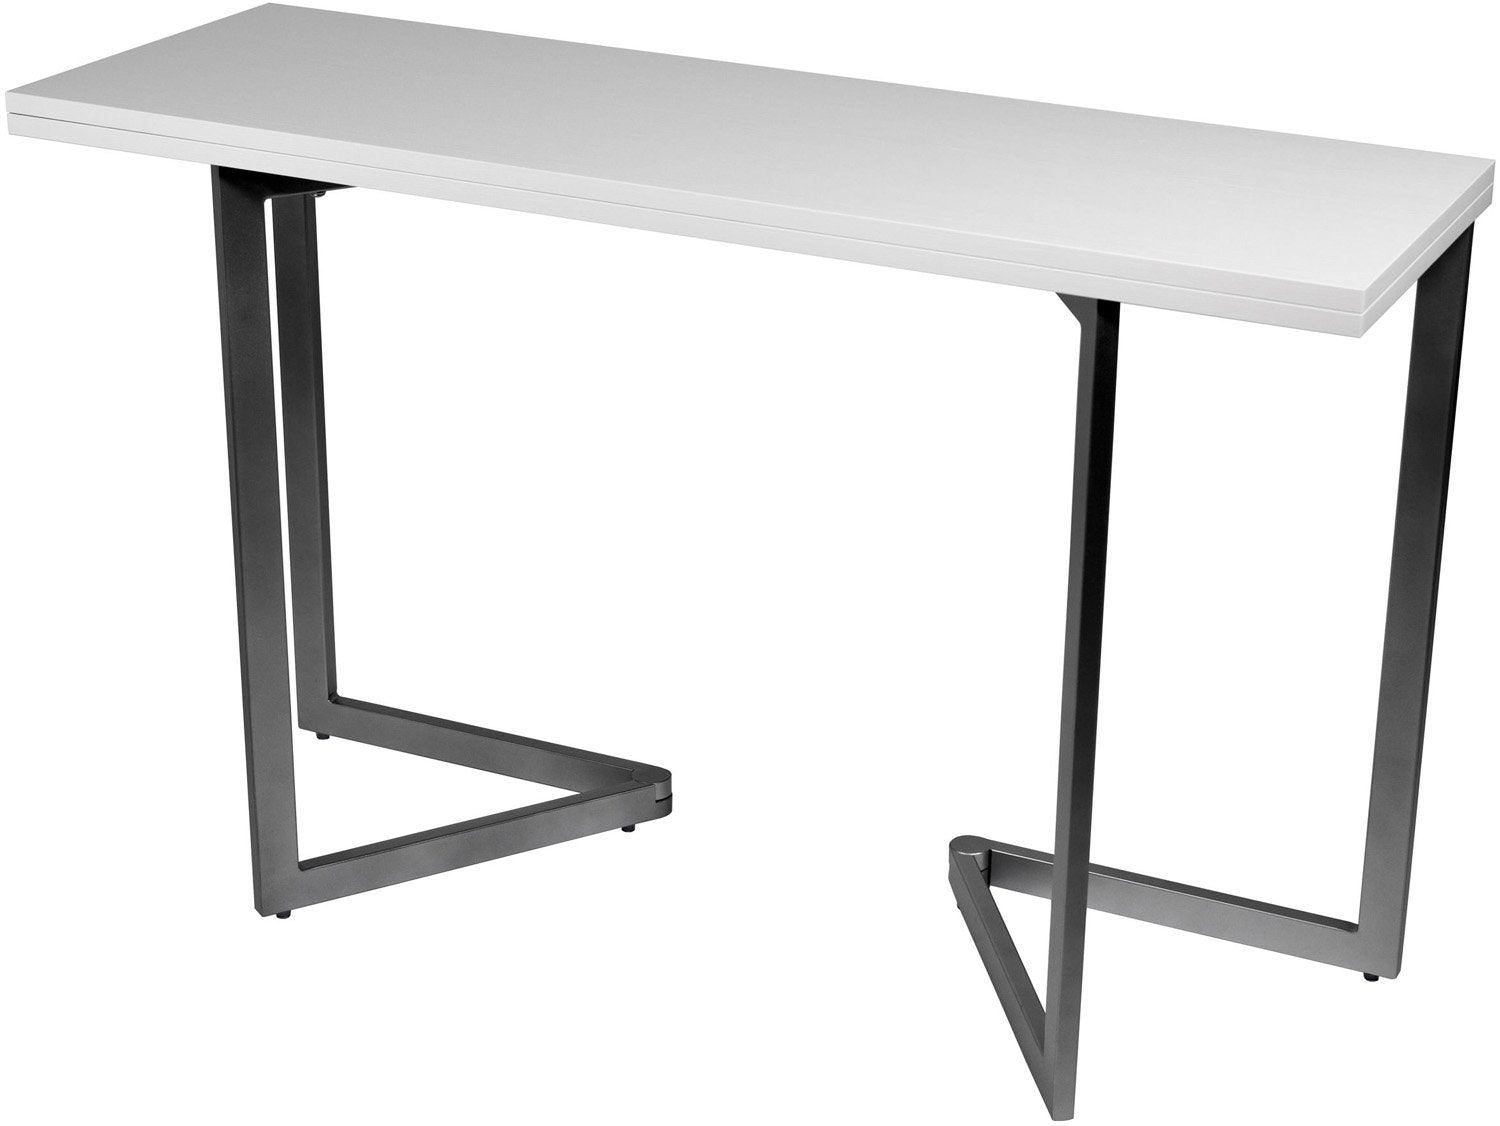 Corner Housewares Co-2238 Expanding Desk And Dining Table